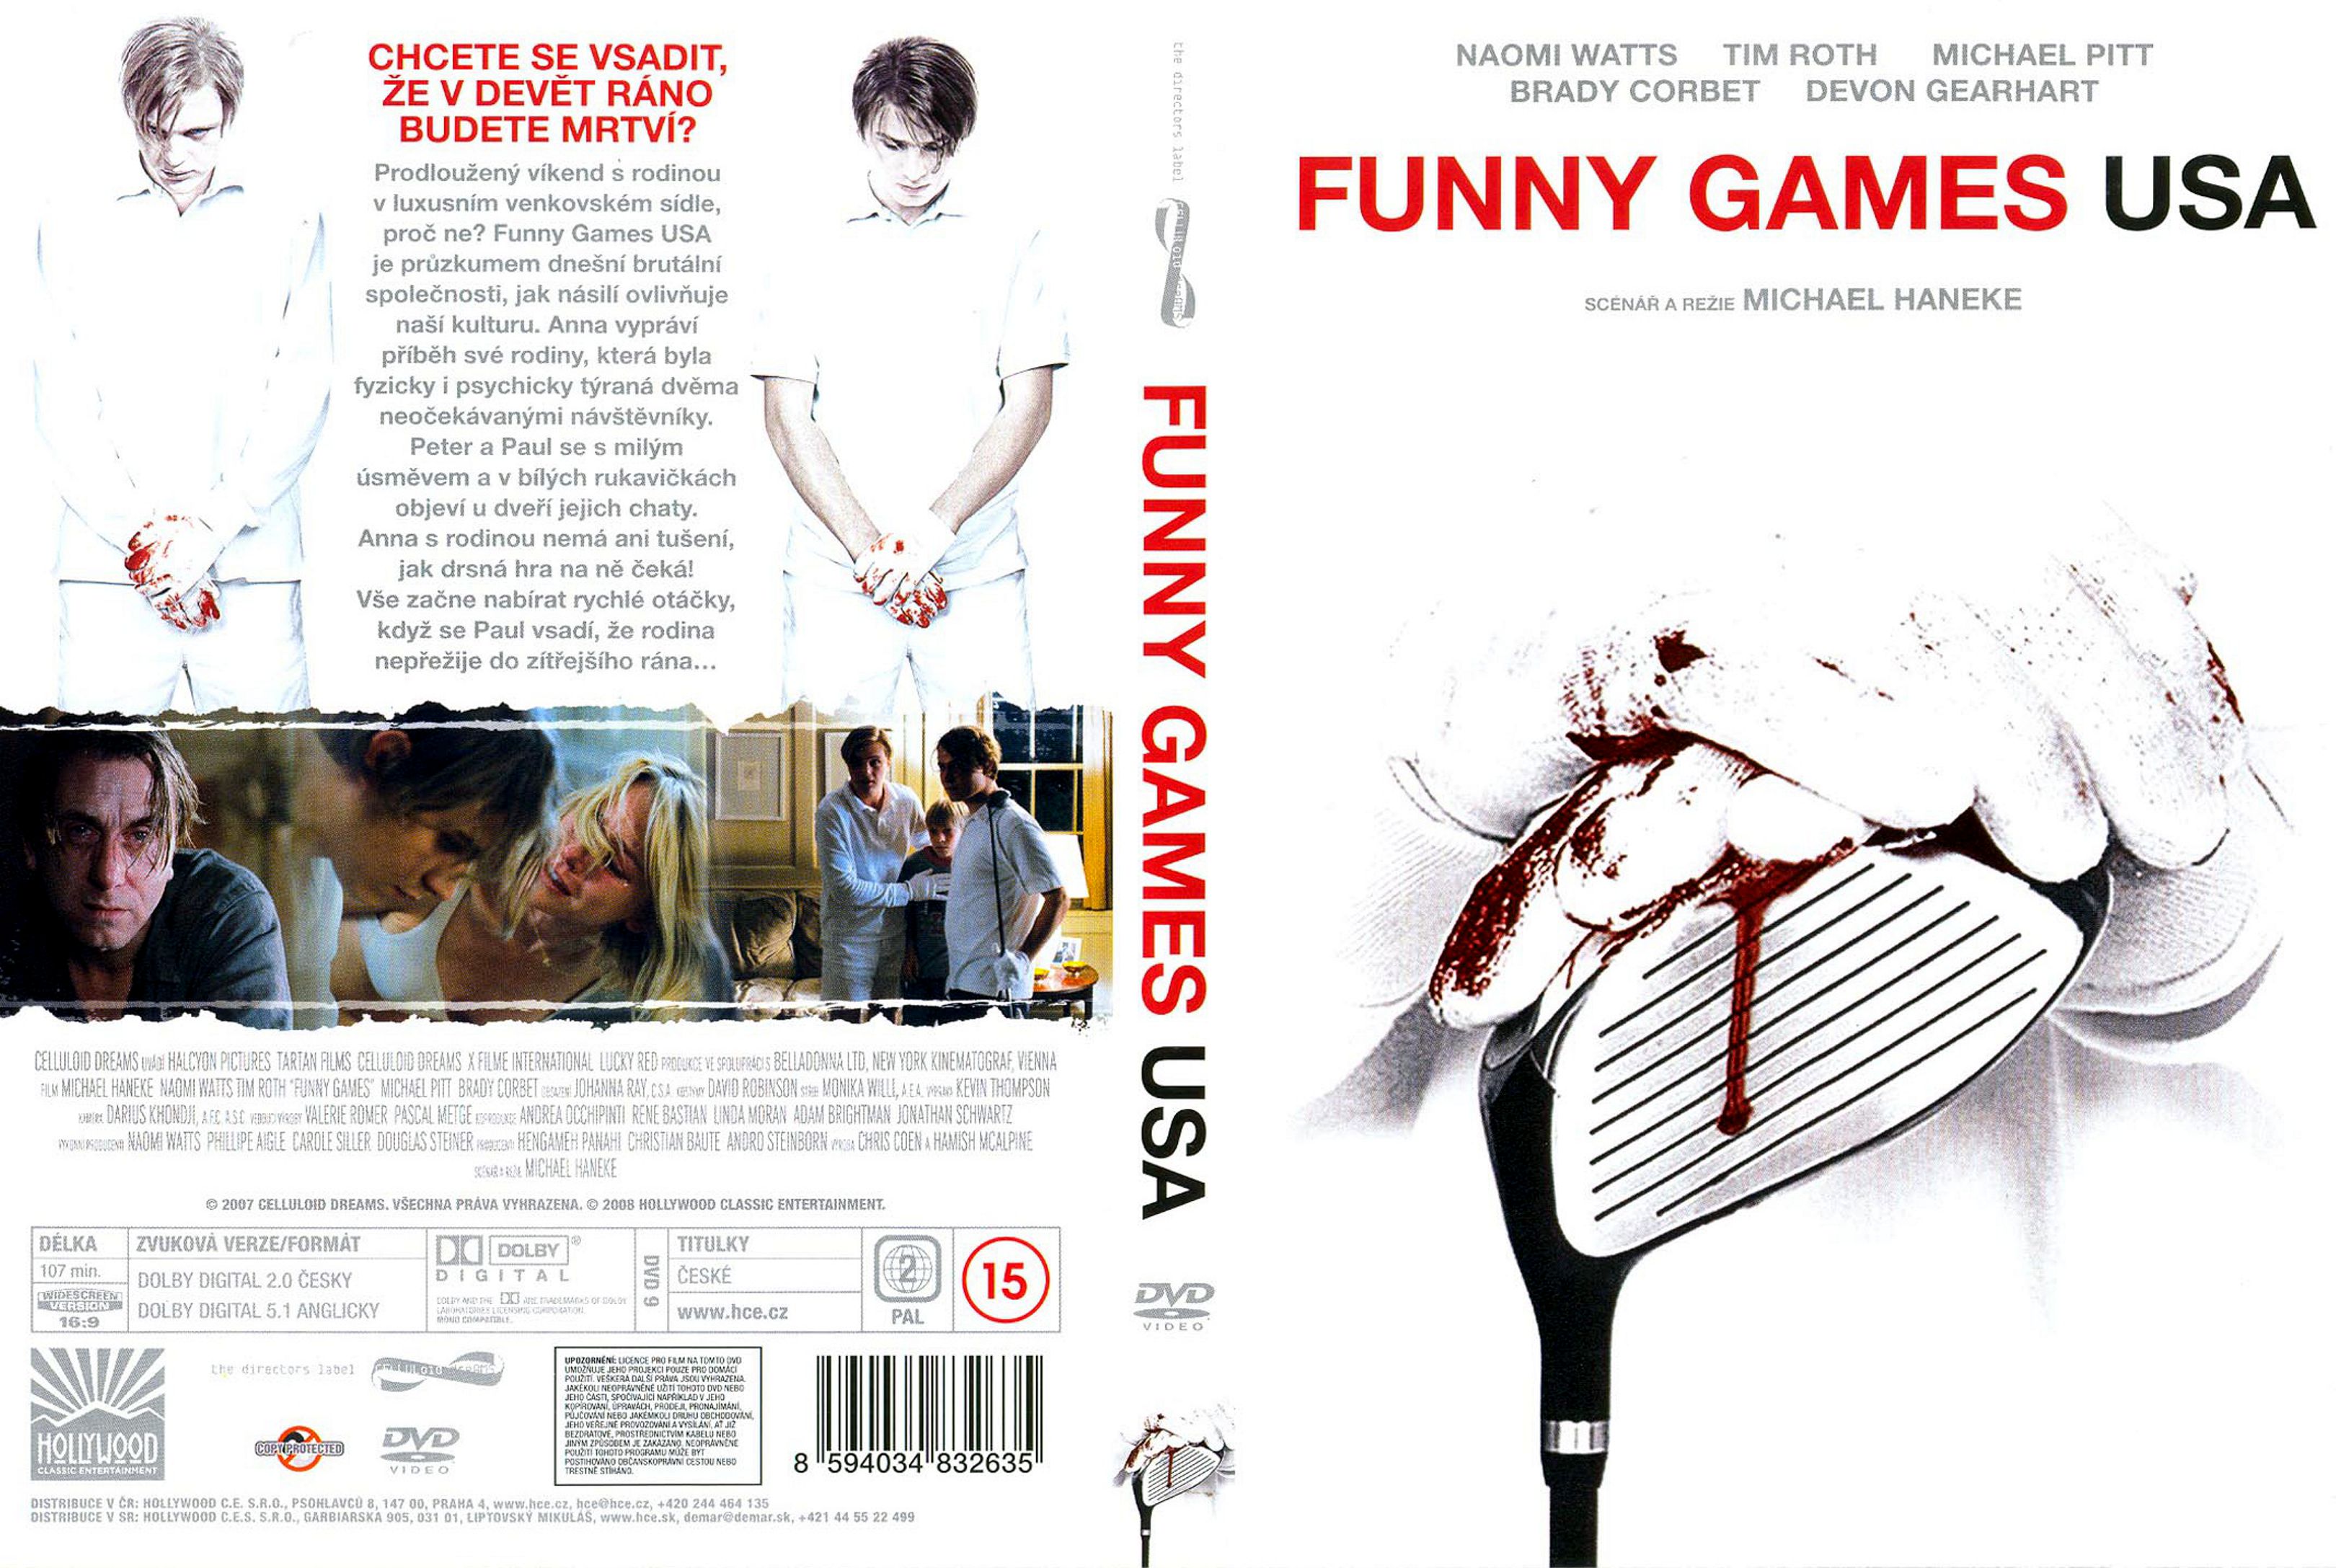 Funny Games U.S. (2008) dvd movie cover